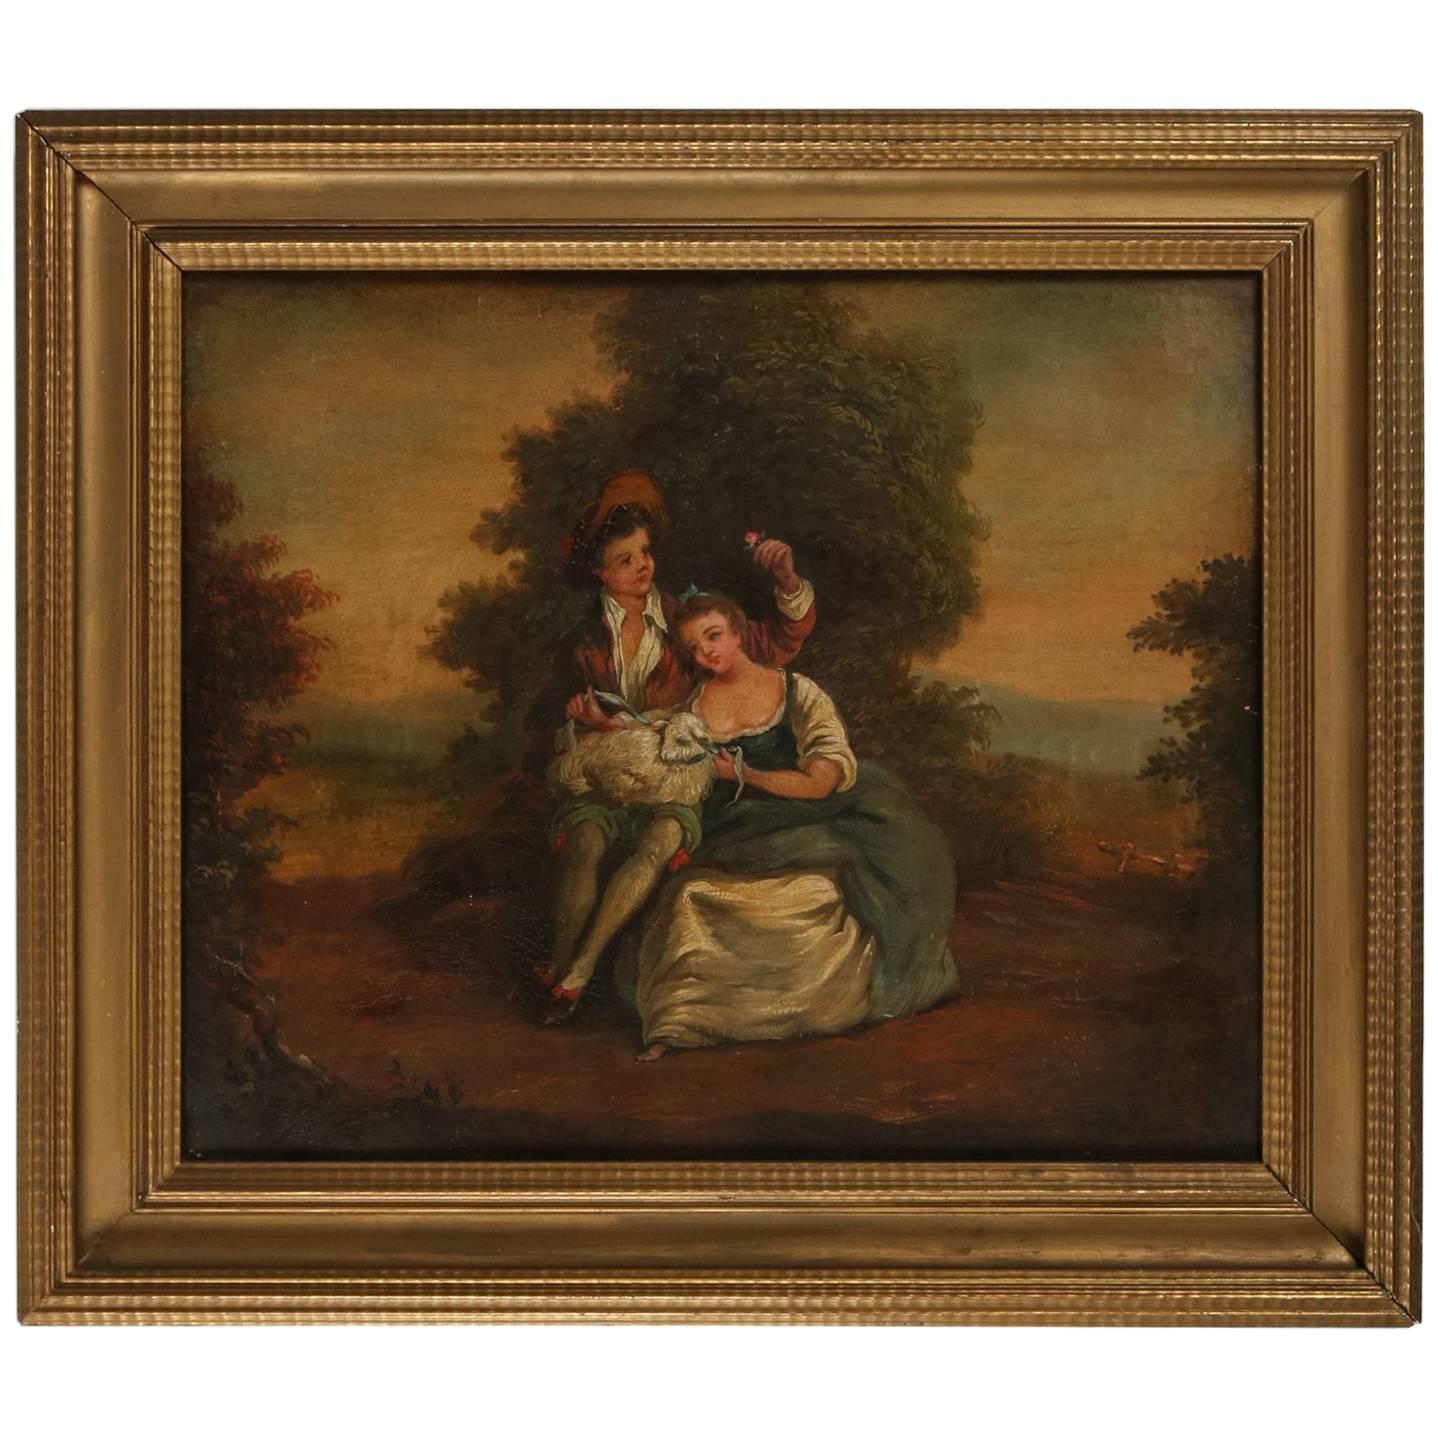 Antique English Oil on Canvas Painting of Landscape, Courting Couple, circa 1880